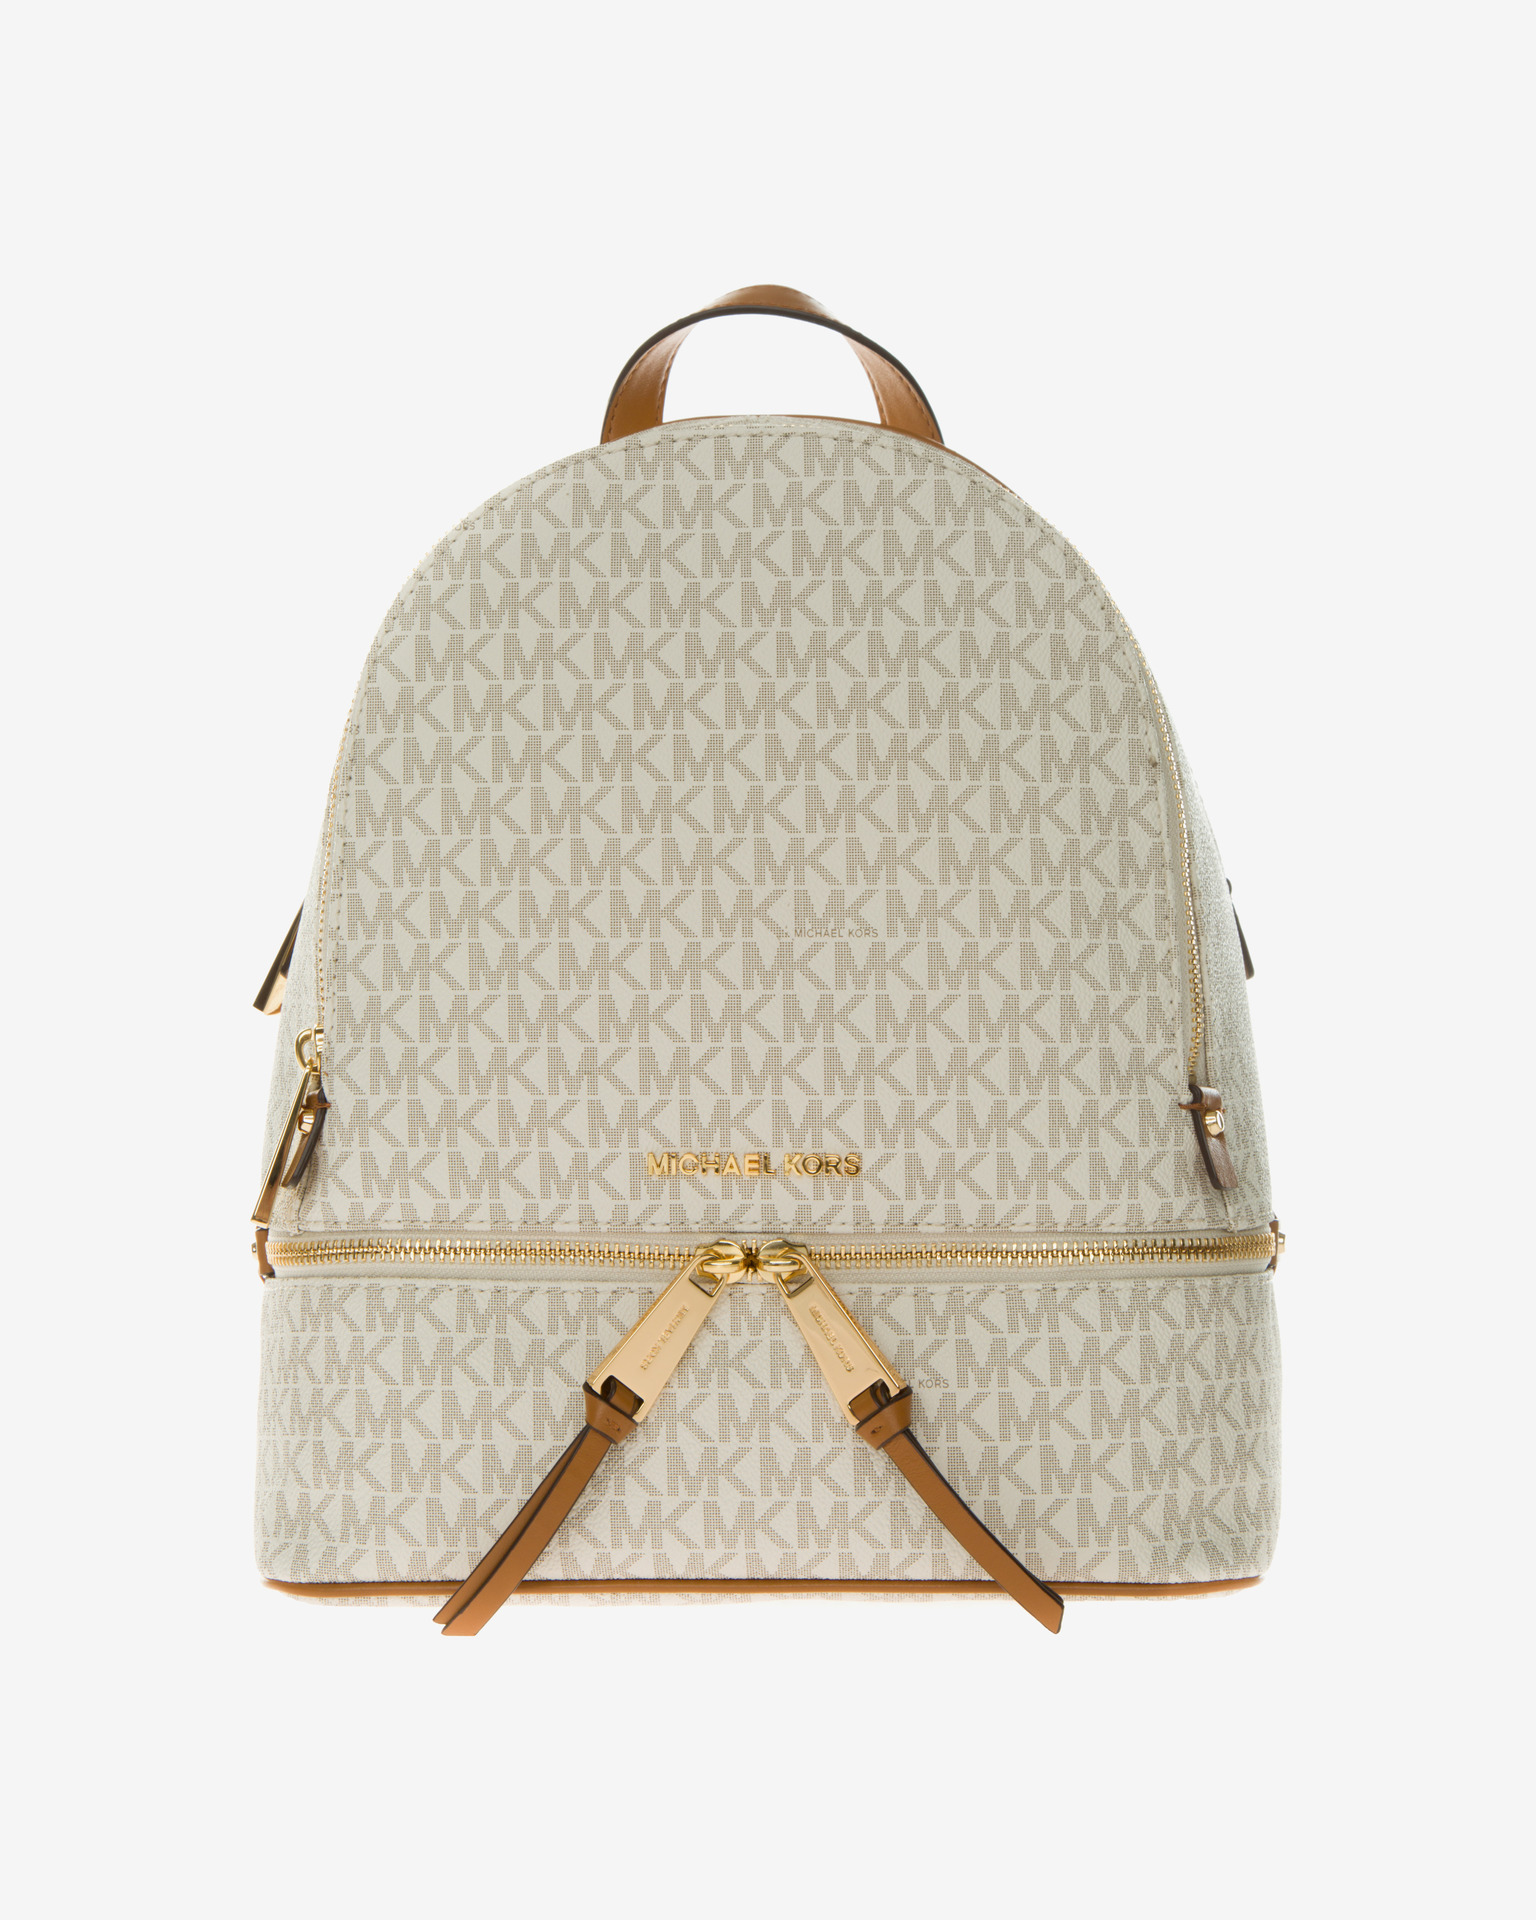 michael kors backpack outlet price